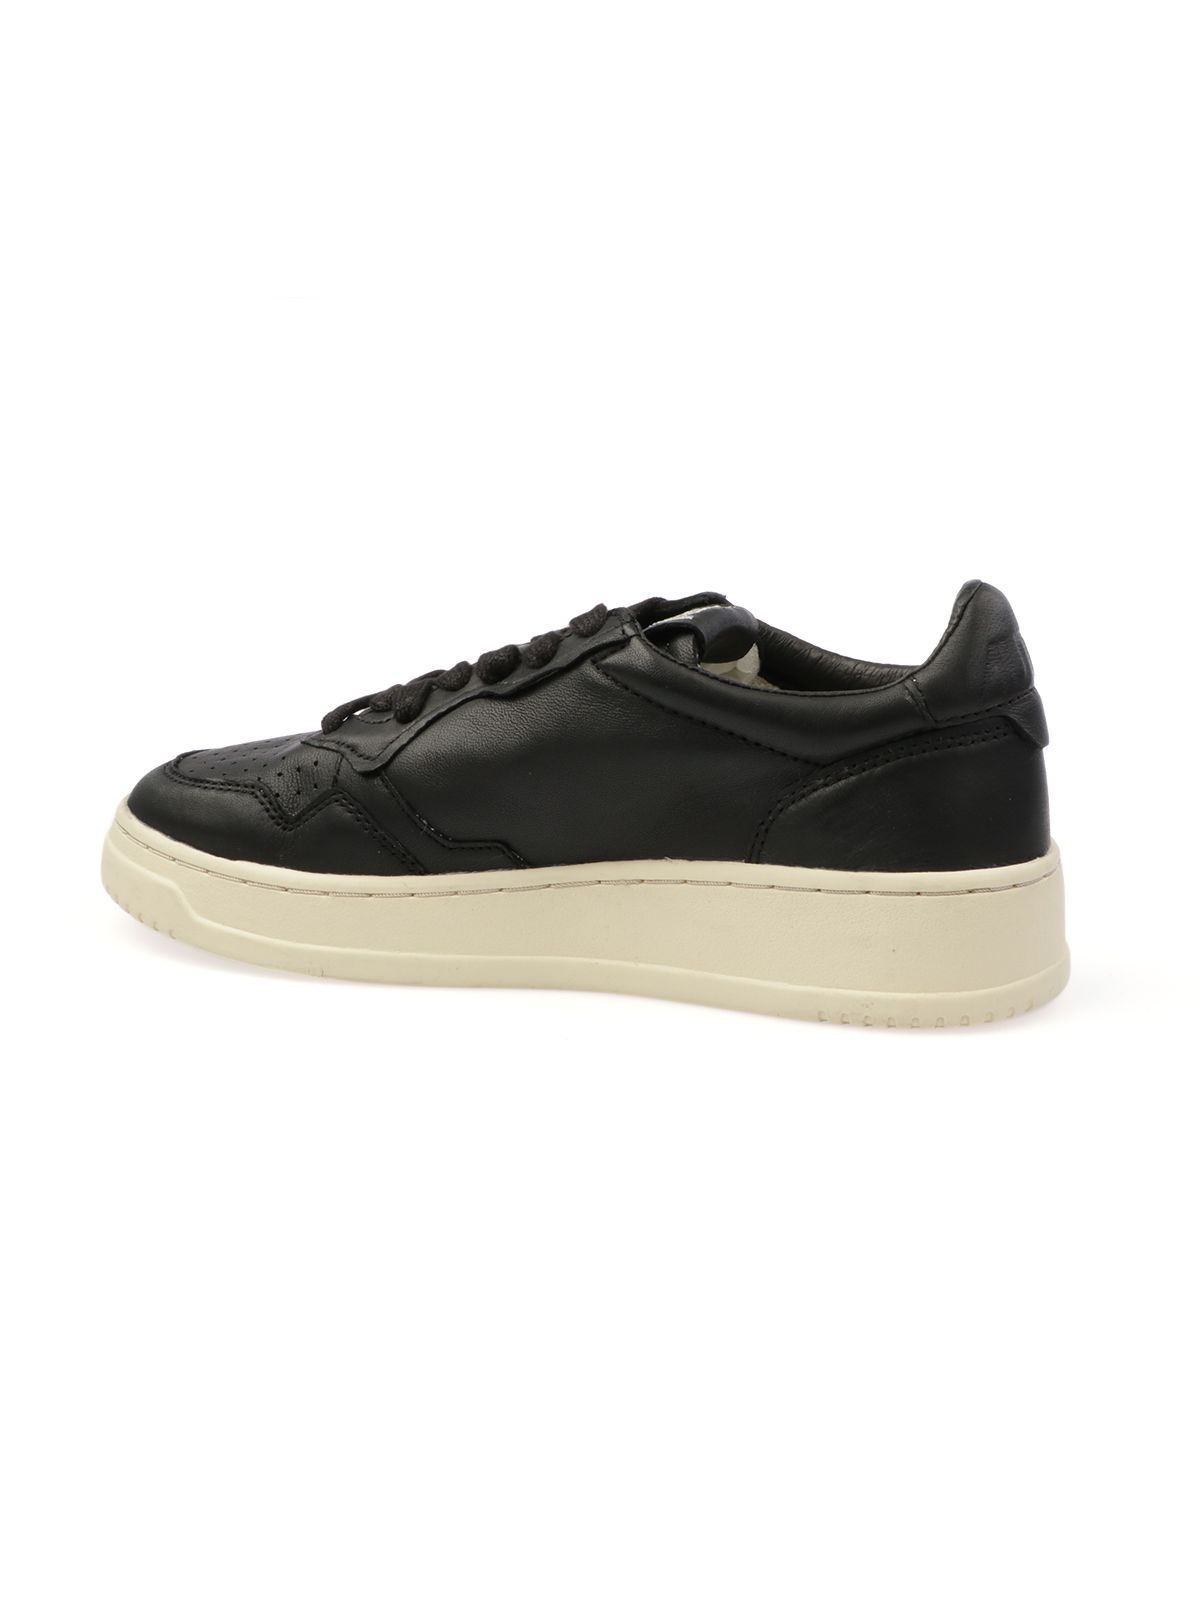 Immagine di Autry | Footwear Autry 01 Low